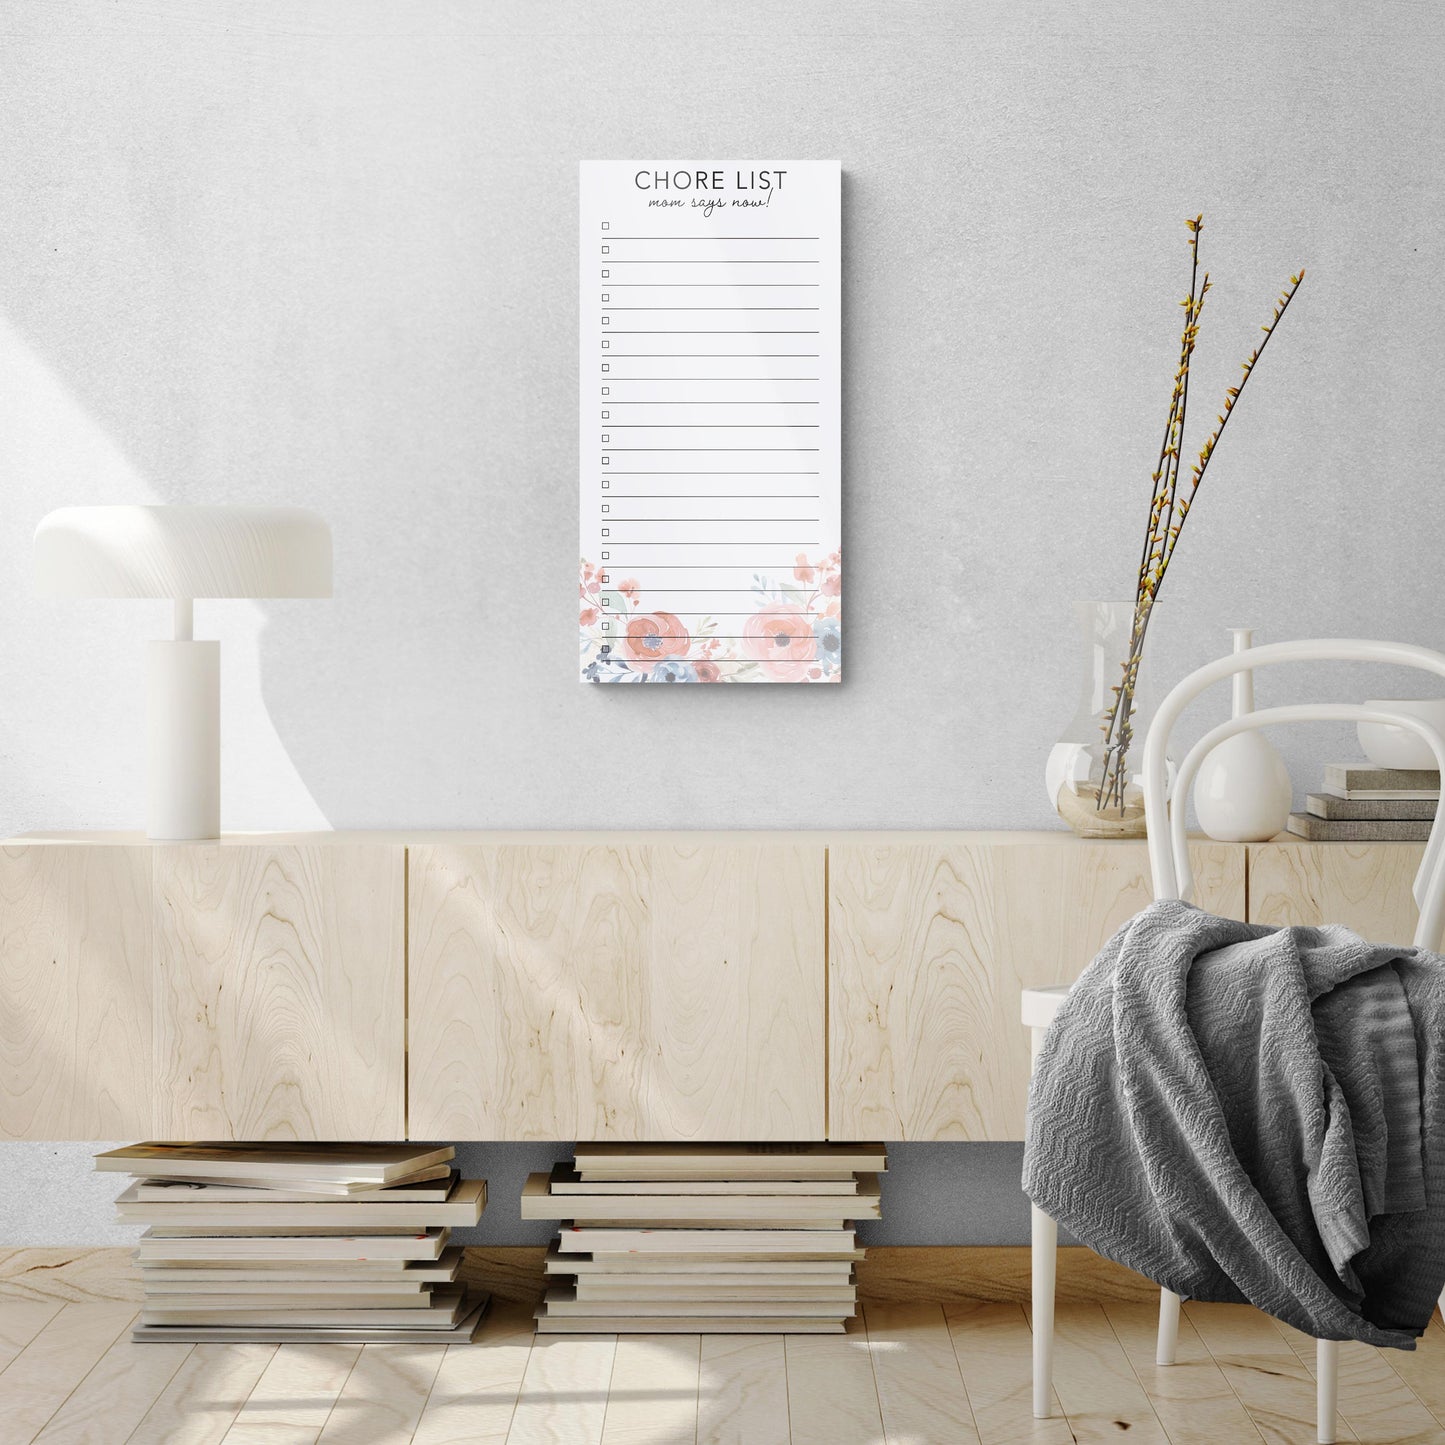 Mother's Day Tracker Floral Chore List | 12x24